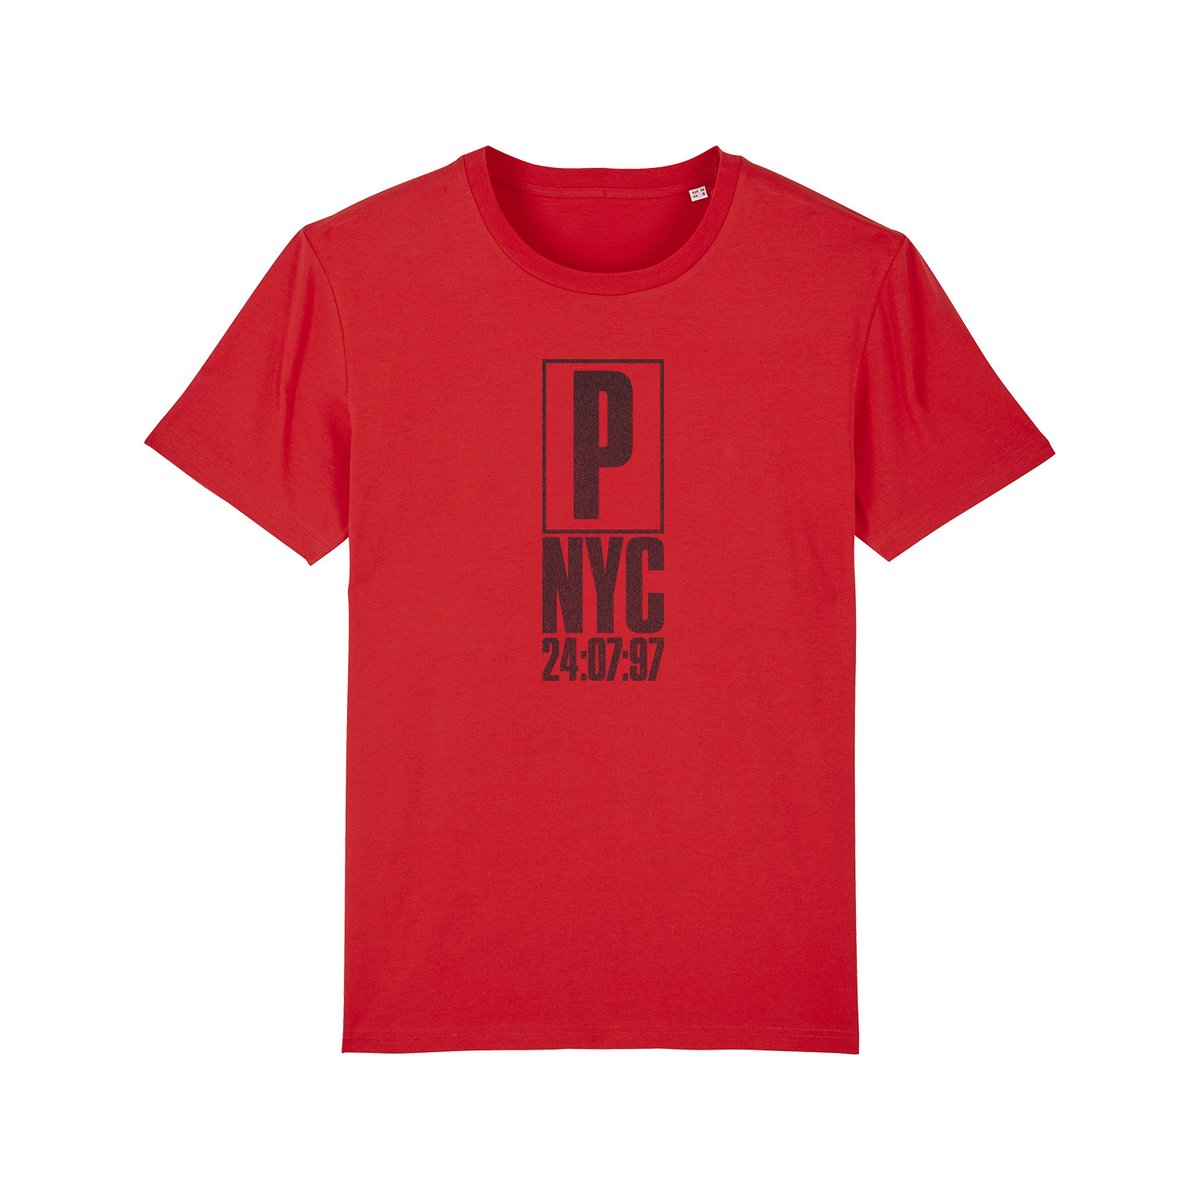 We have had some limited edition t-shirts made to accompany the remastered digi release of our Roseland live album. They are based on the backstage pass from the Roseland gig and the red is taken from the Roseland sign outside. shop.portishead.co.uk